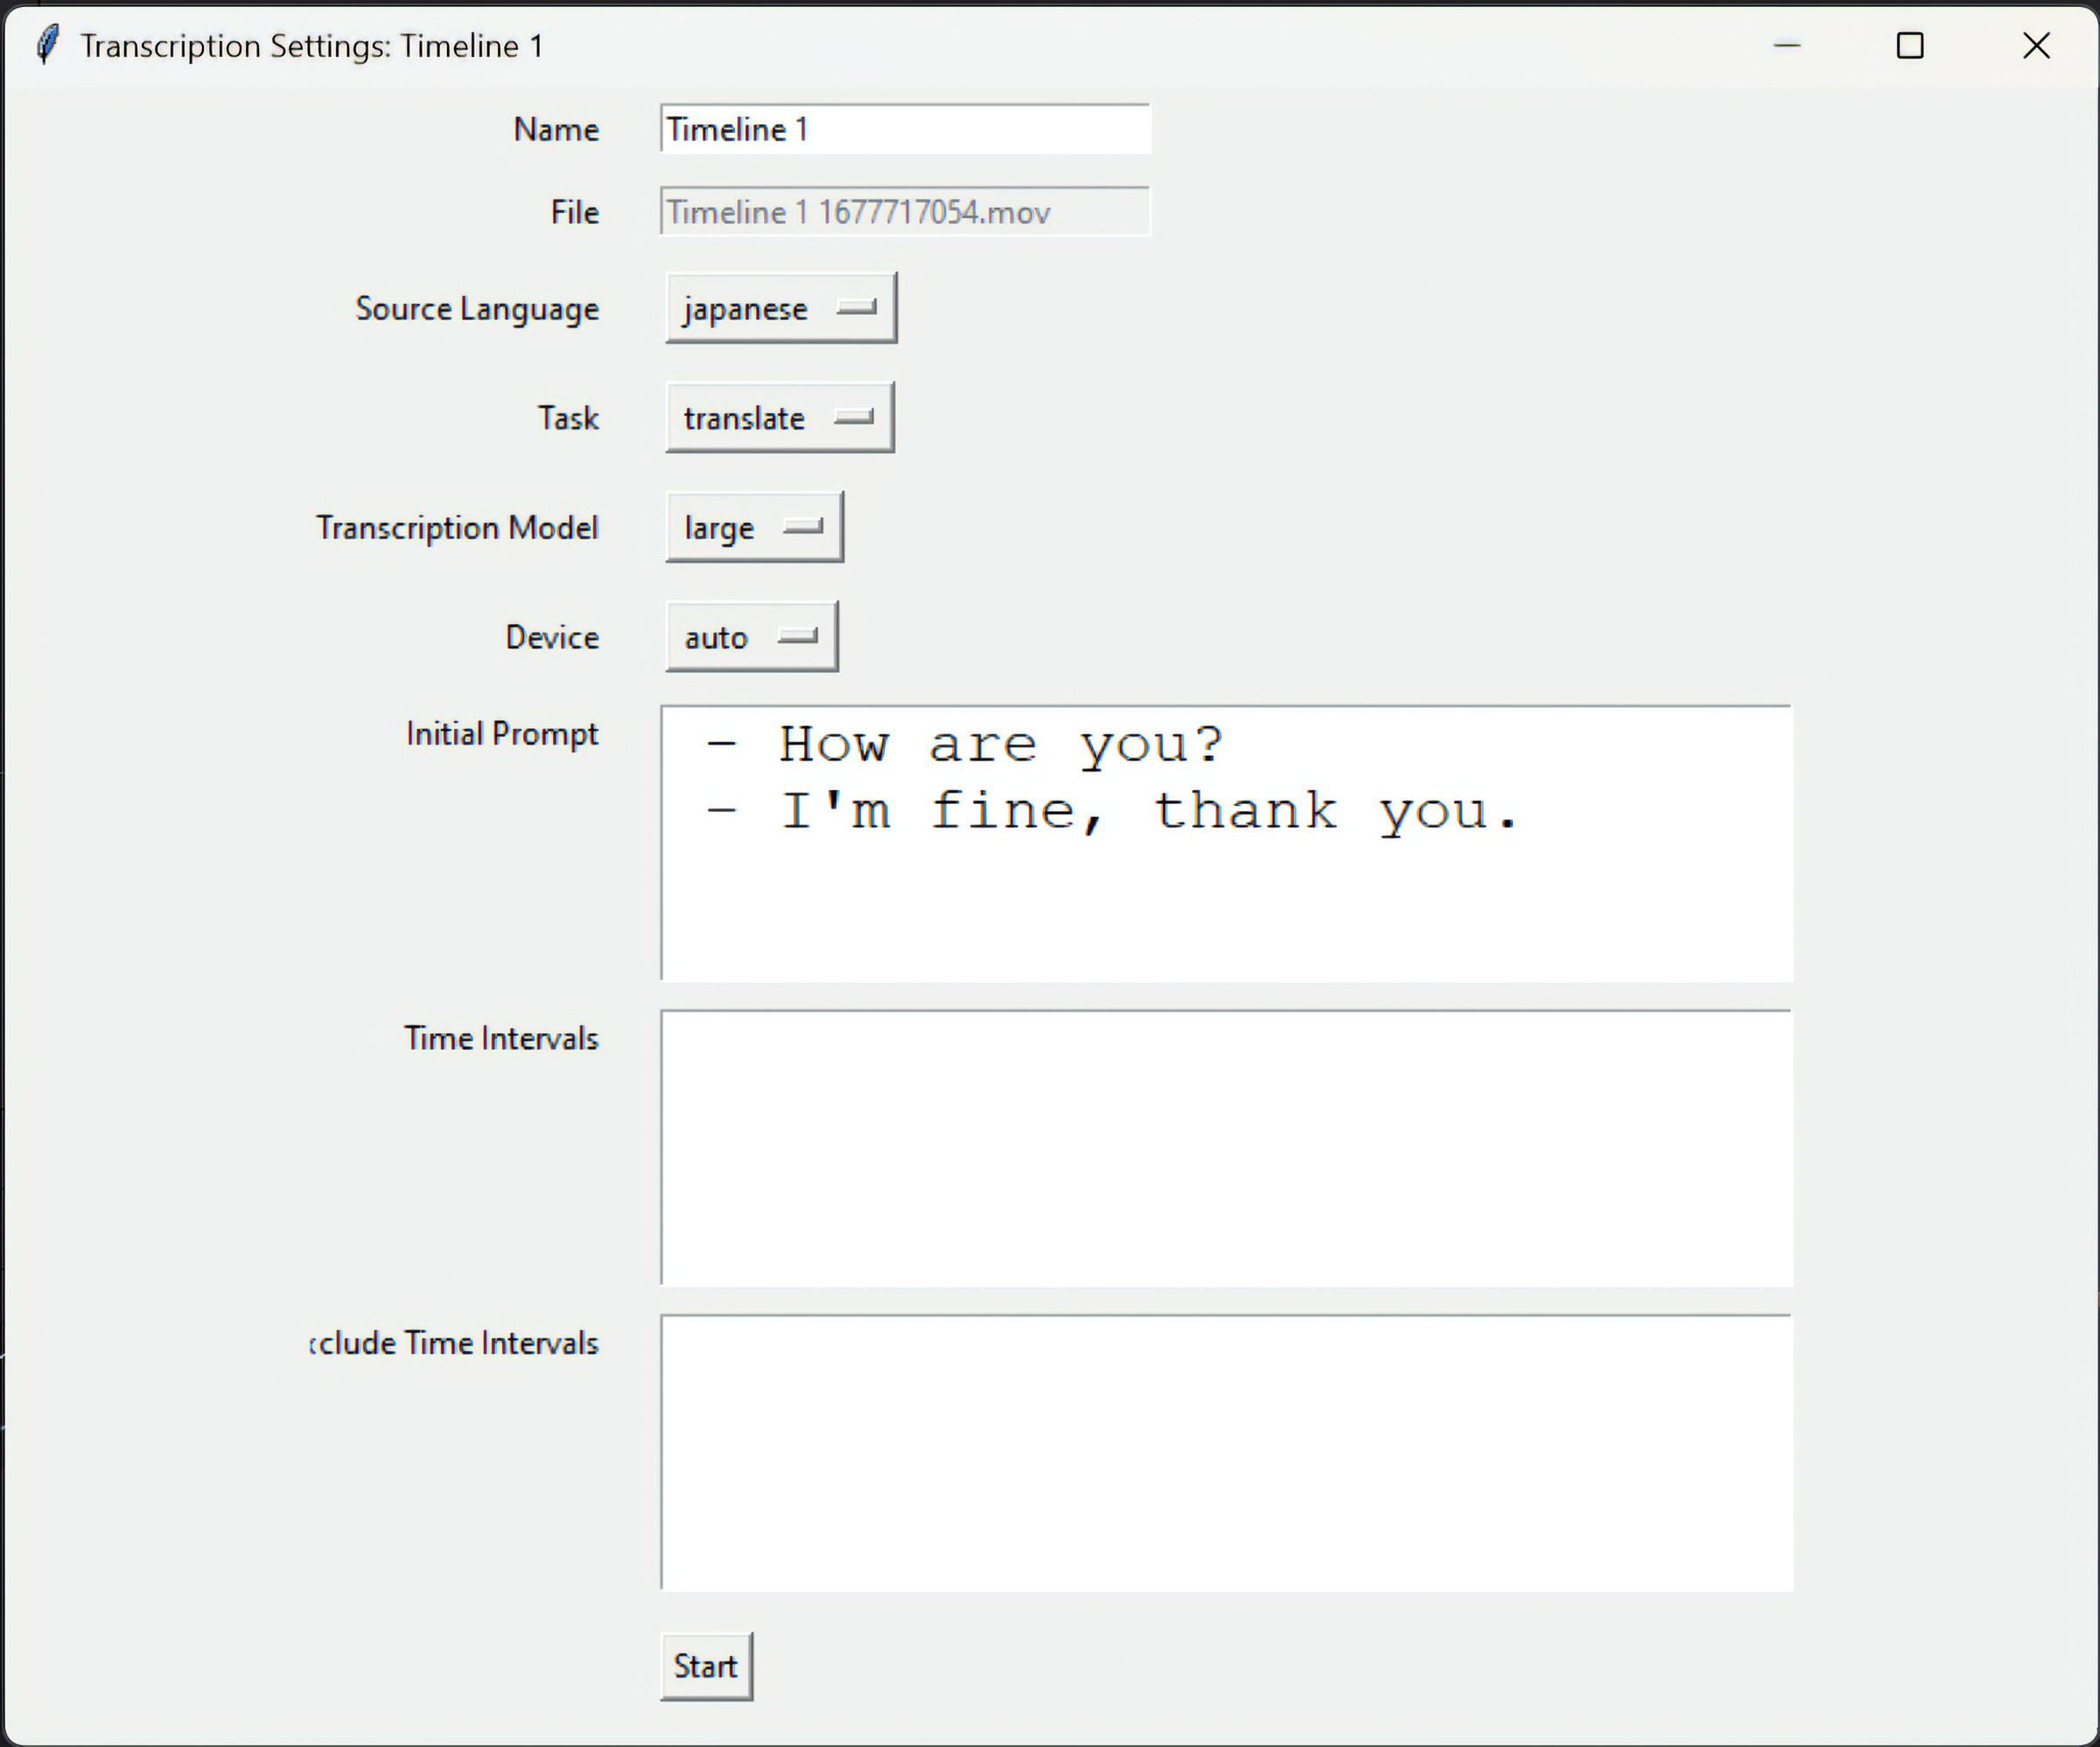 A picture of the transcription settings in StoryToolKitAI